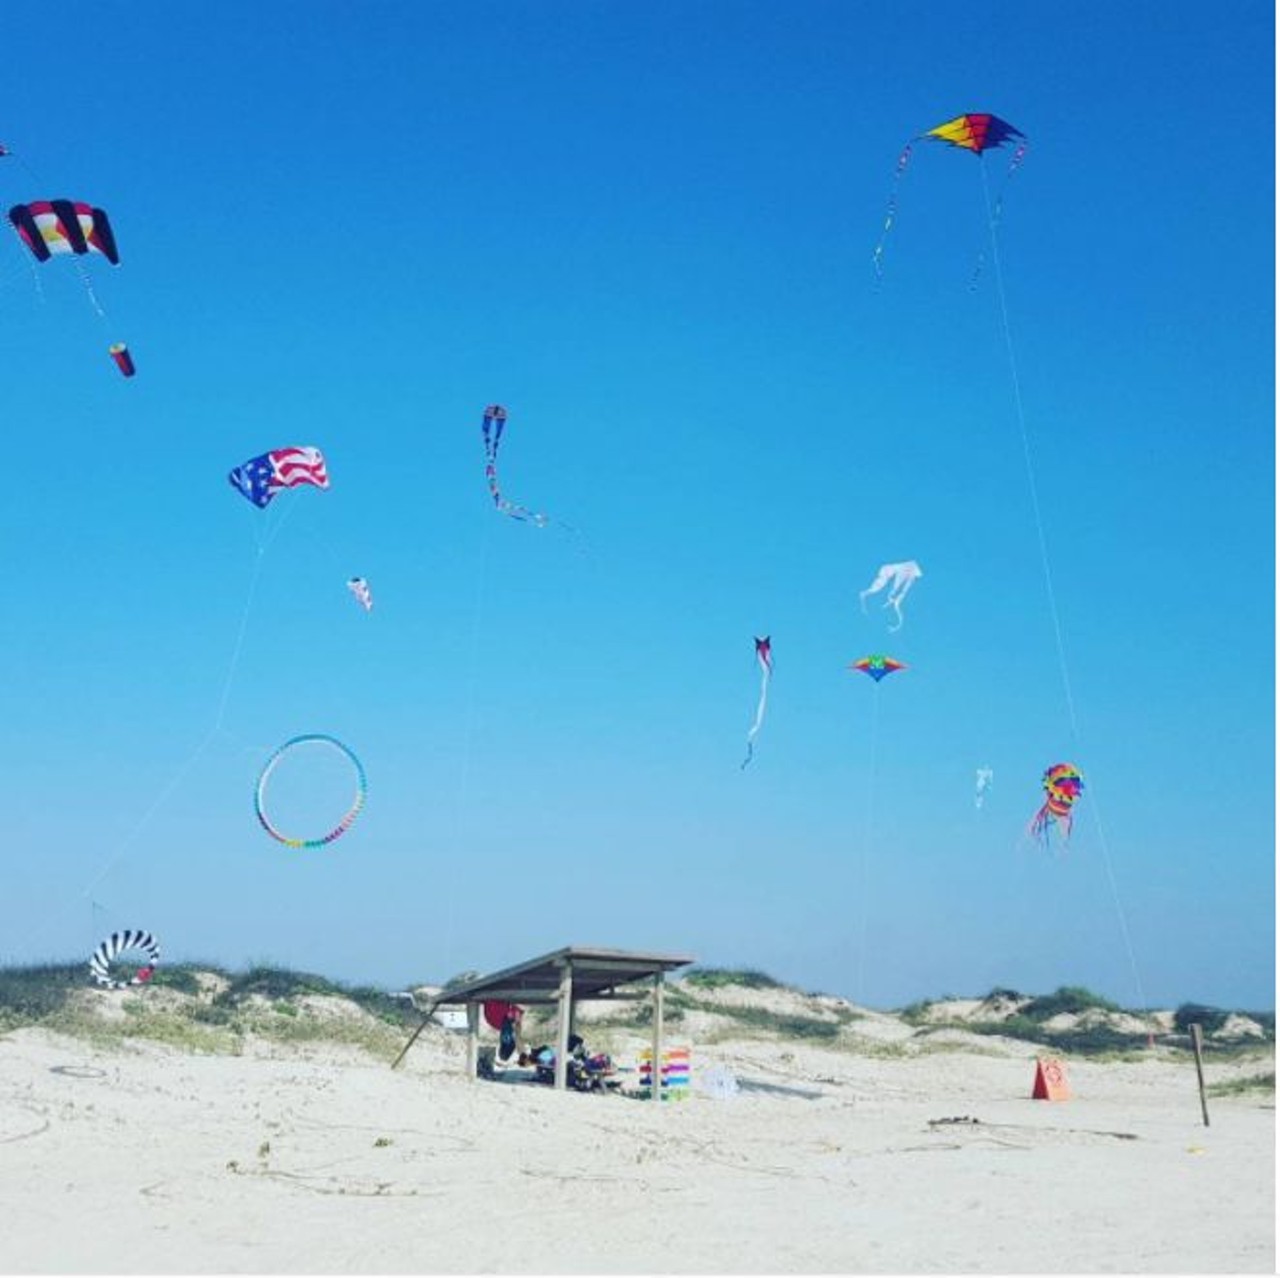 Malaquite Beach
Travel time: 3 hours
Bring your sunscreen, towels, and kites to fly in blue skies at Malaquite Beach.
Photo via Instagram,  grpeirano